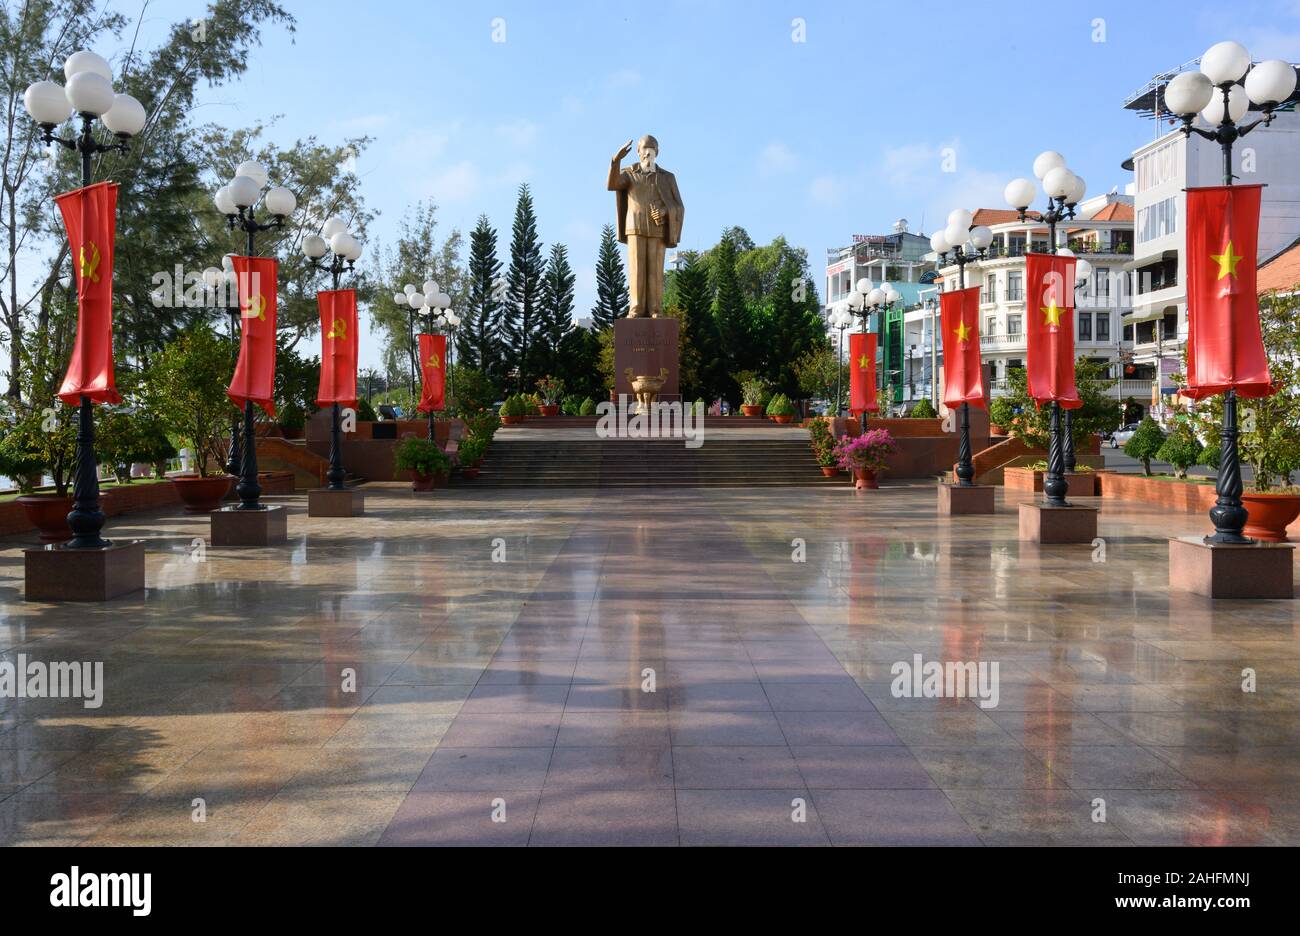 Statue of Ho Chi Minh,  Can Tho, Vietnam Stock Photo